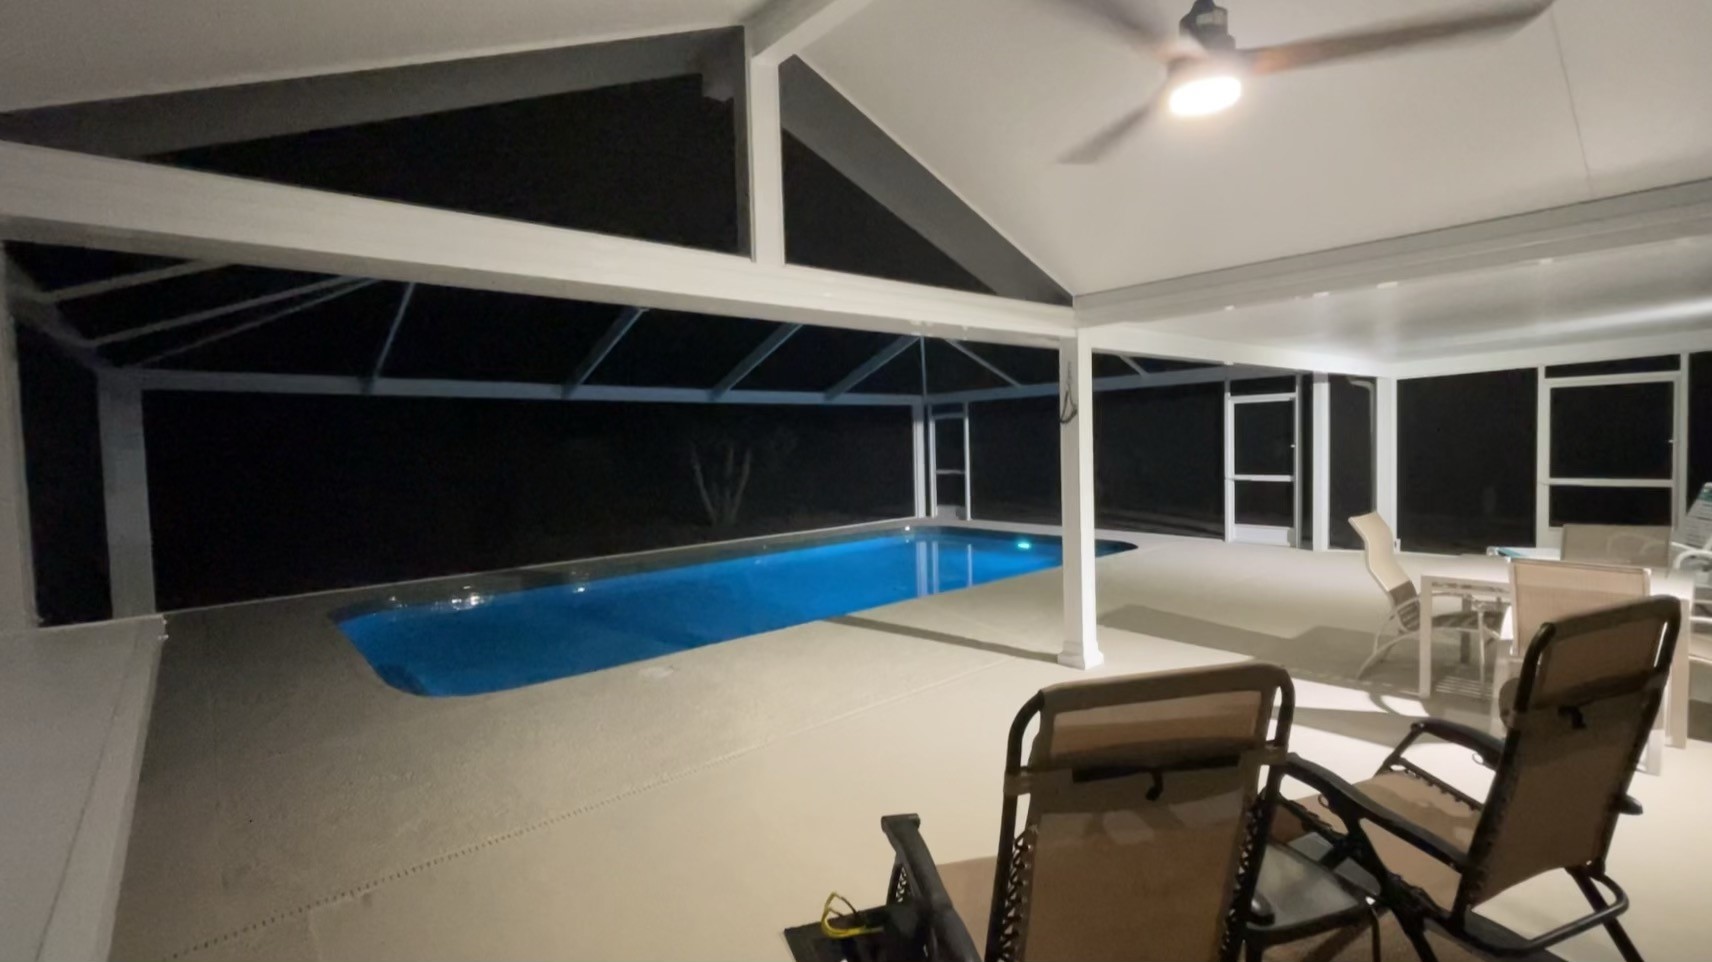 Interior night view of hard cover and pool cage